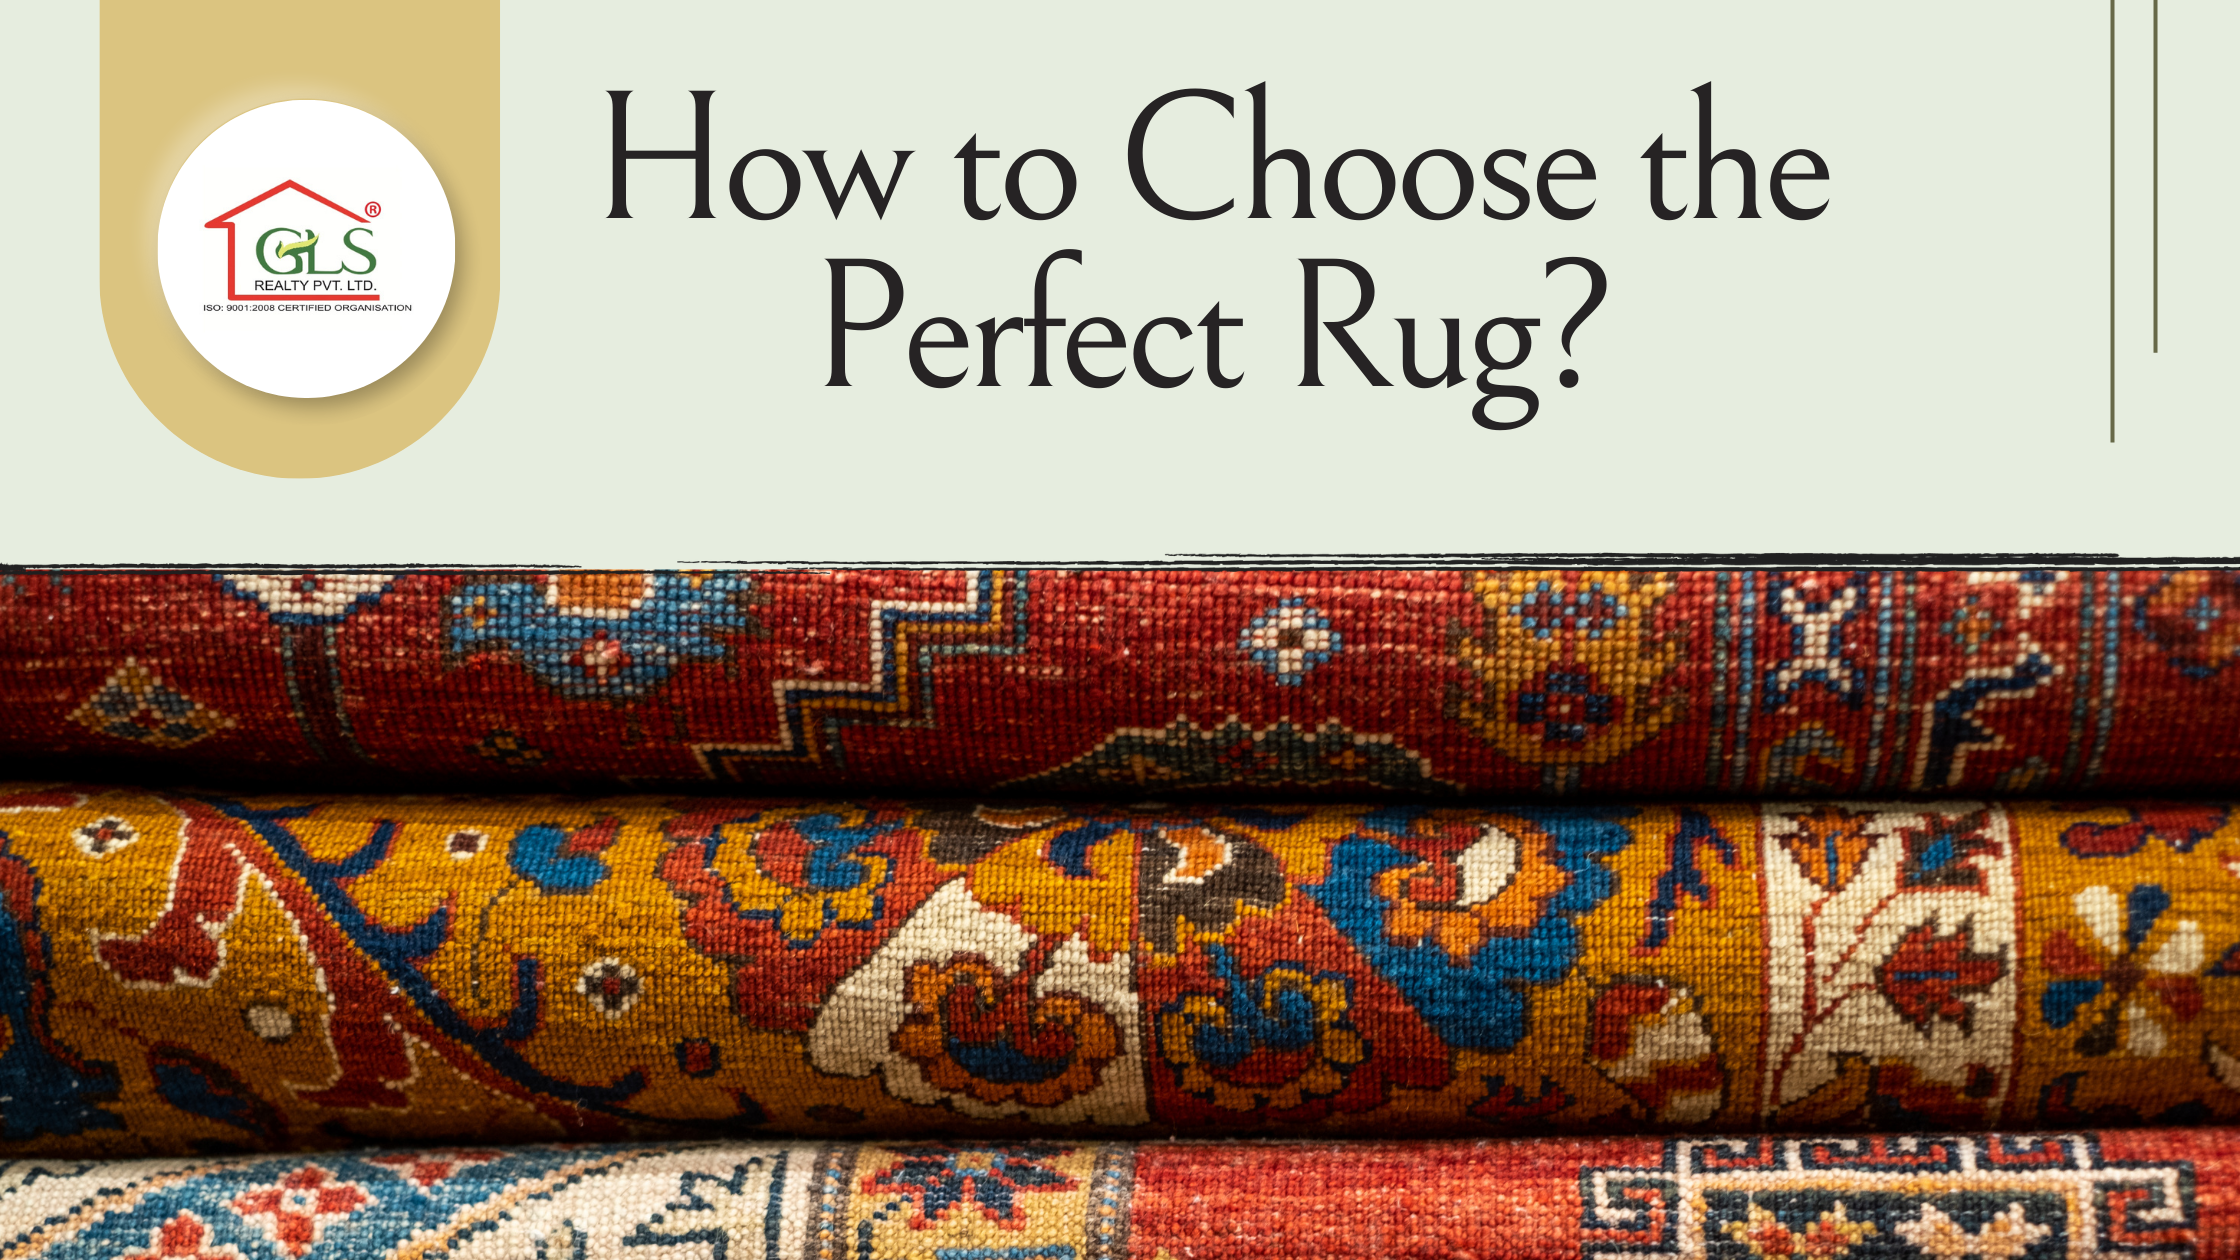 How to Choose the Perfect Rug?